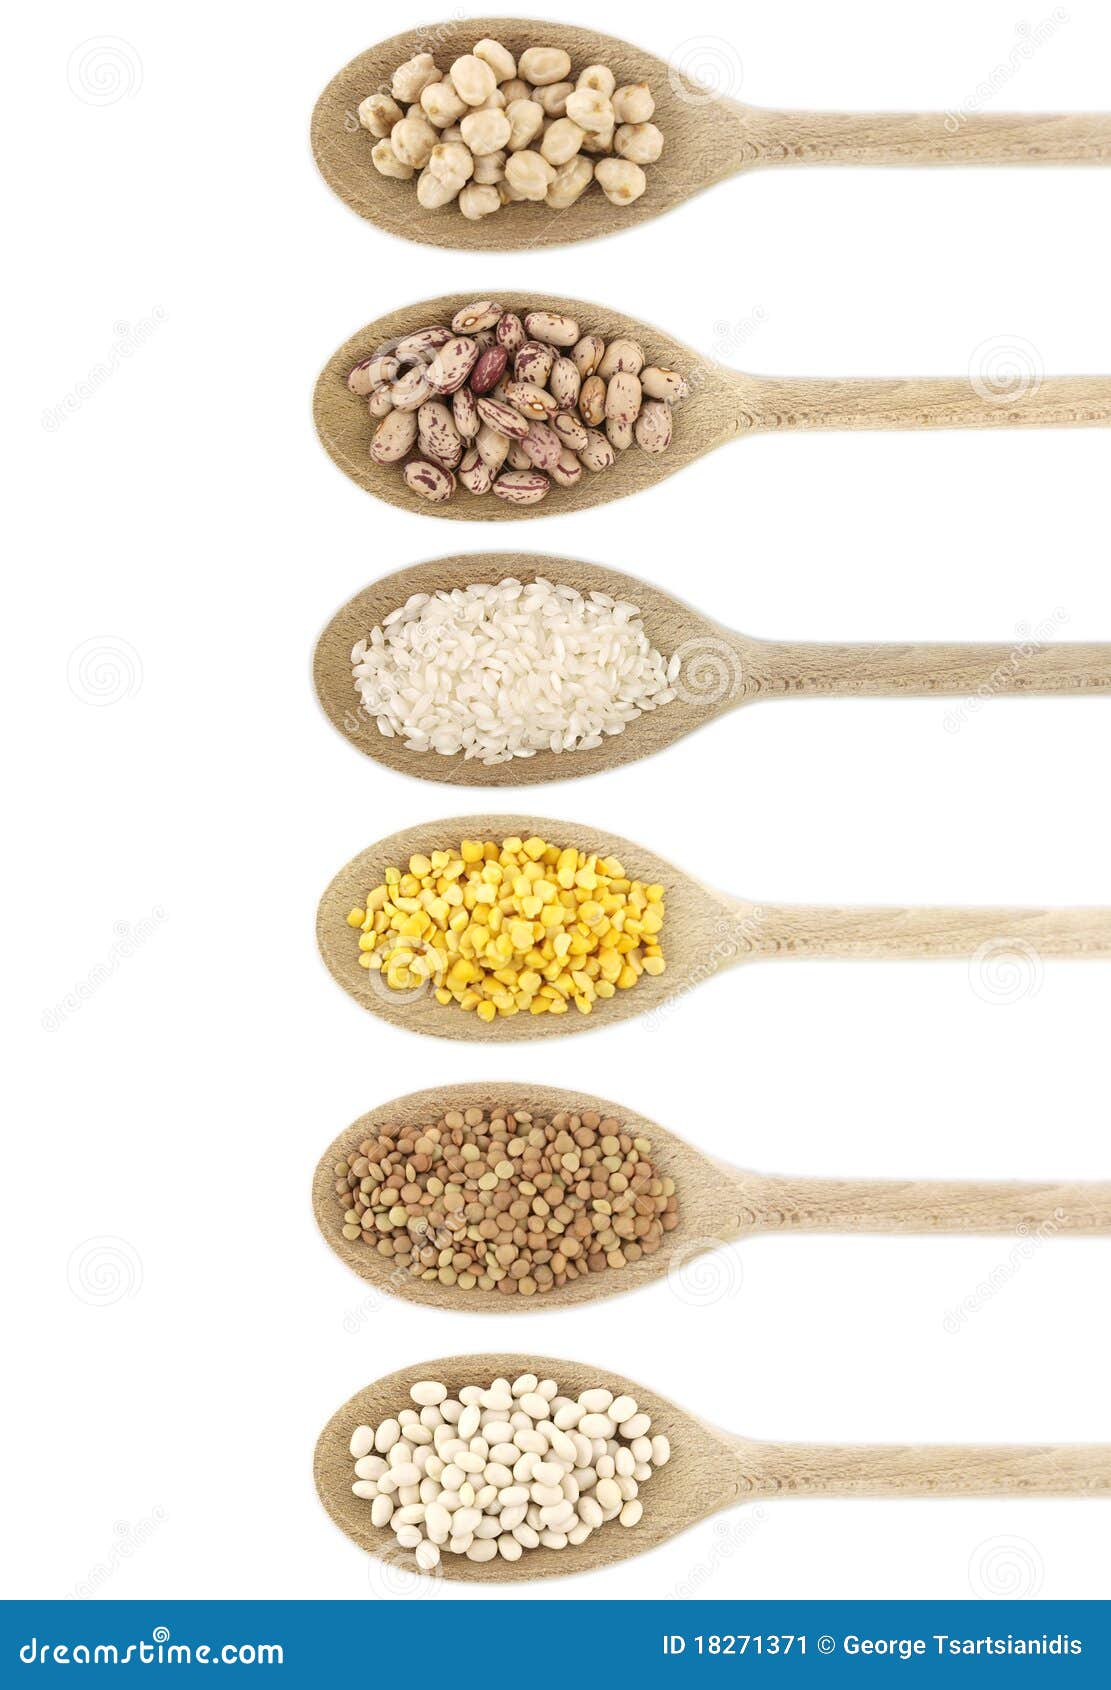 legumes over spoons